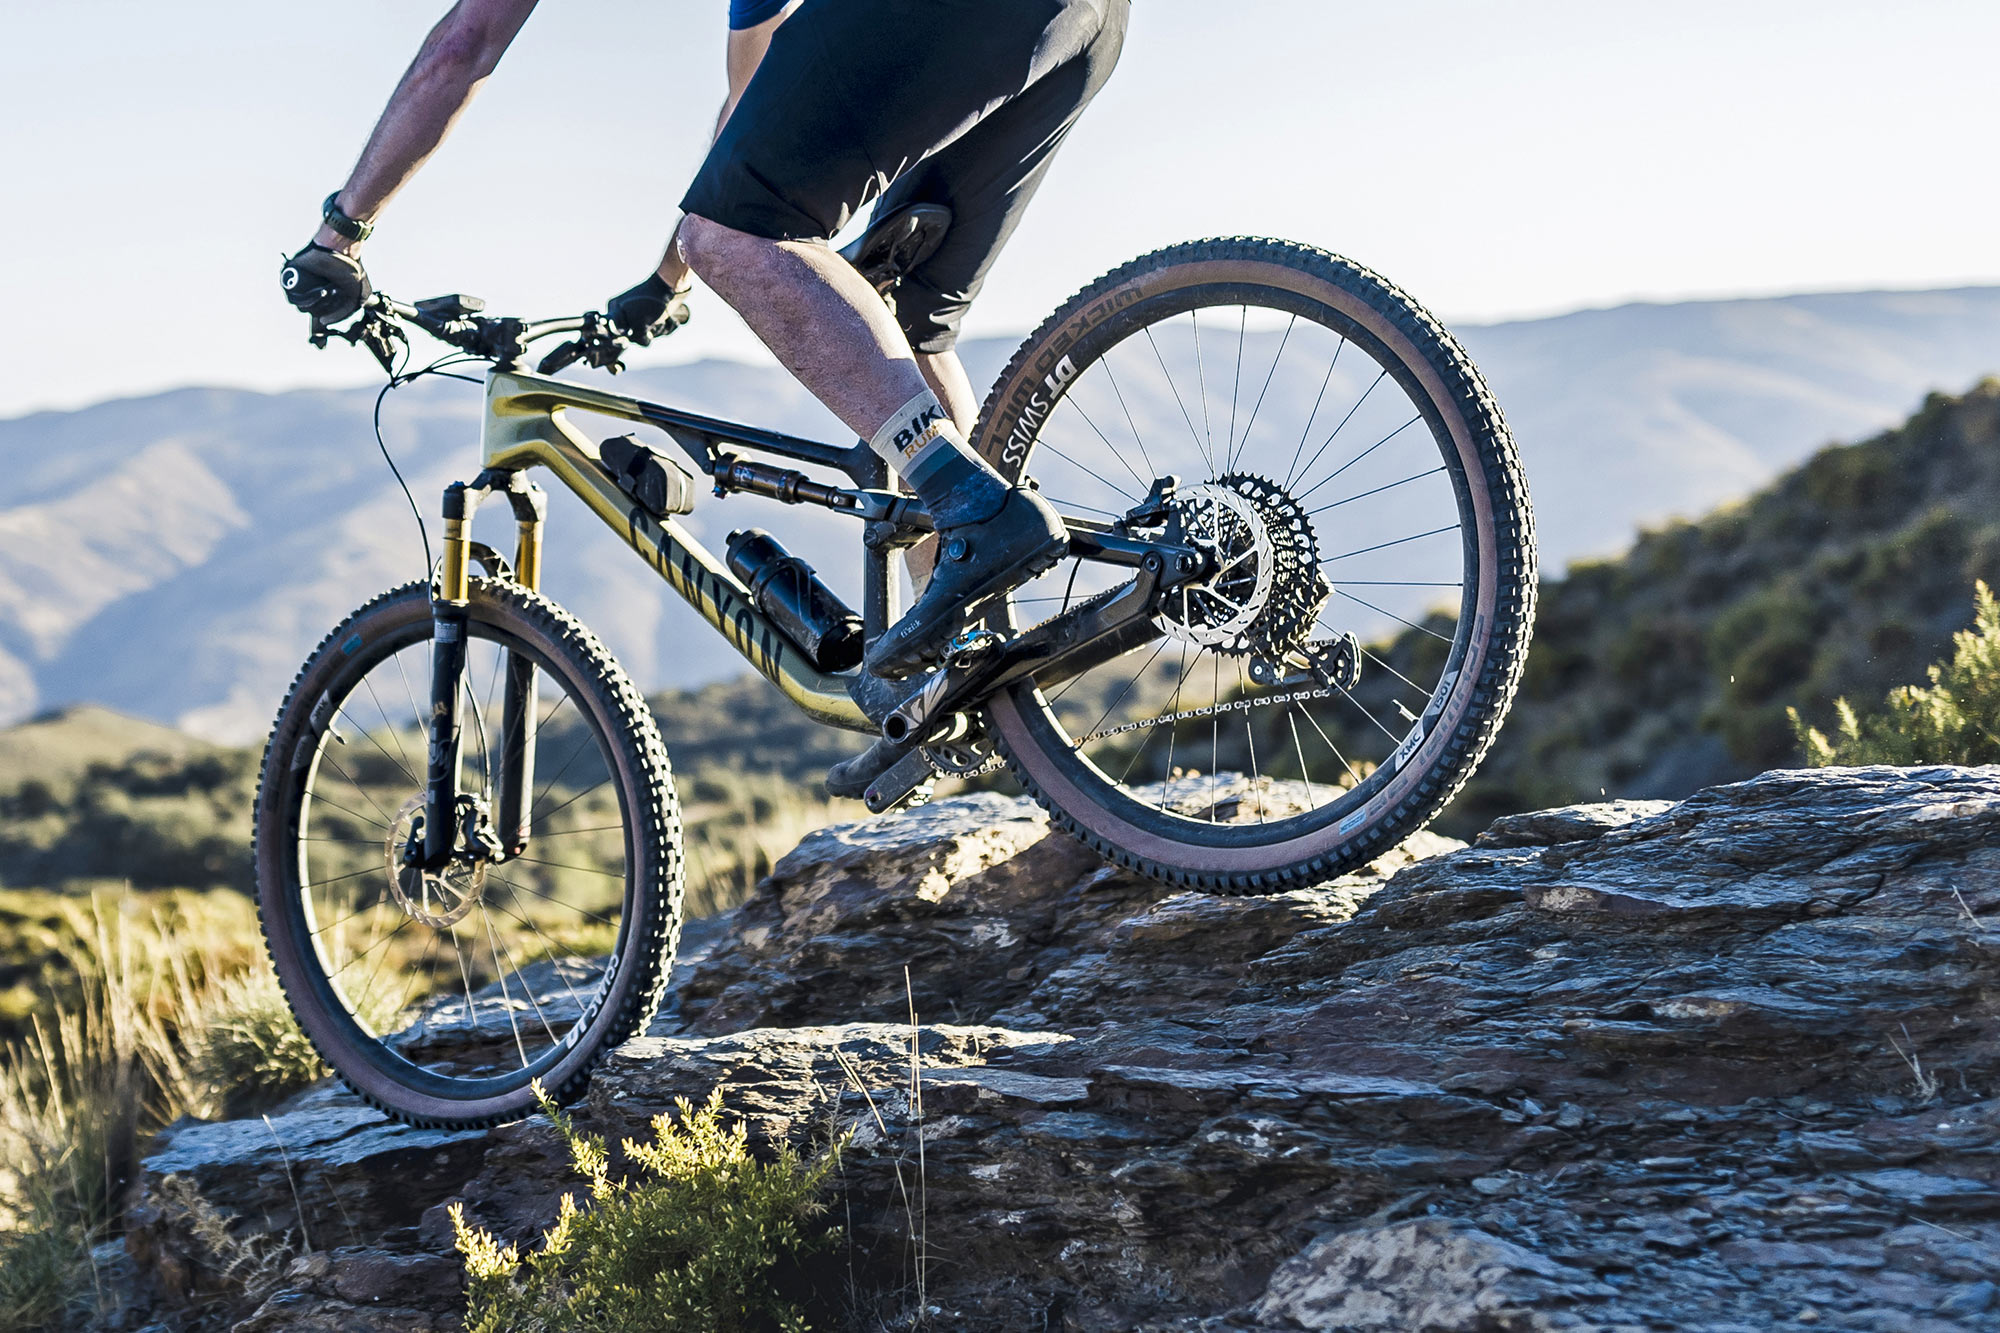 All-New Canyon Neuron updates modern, more capable do-it-all trail mountain bike